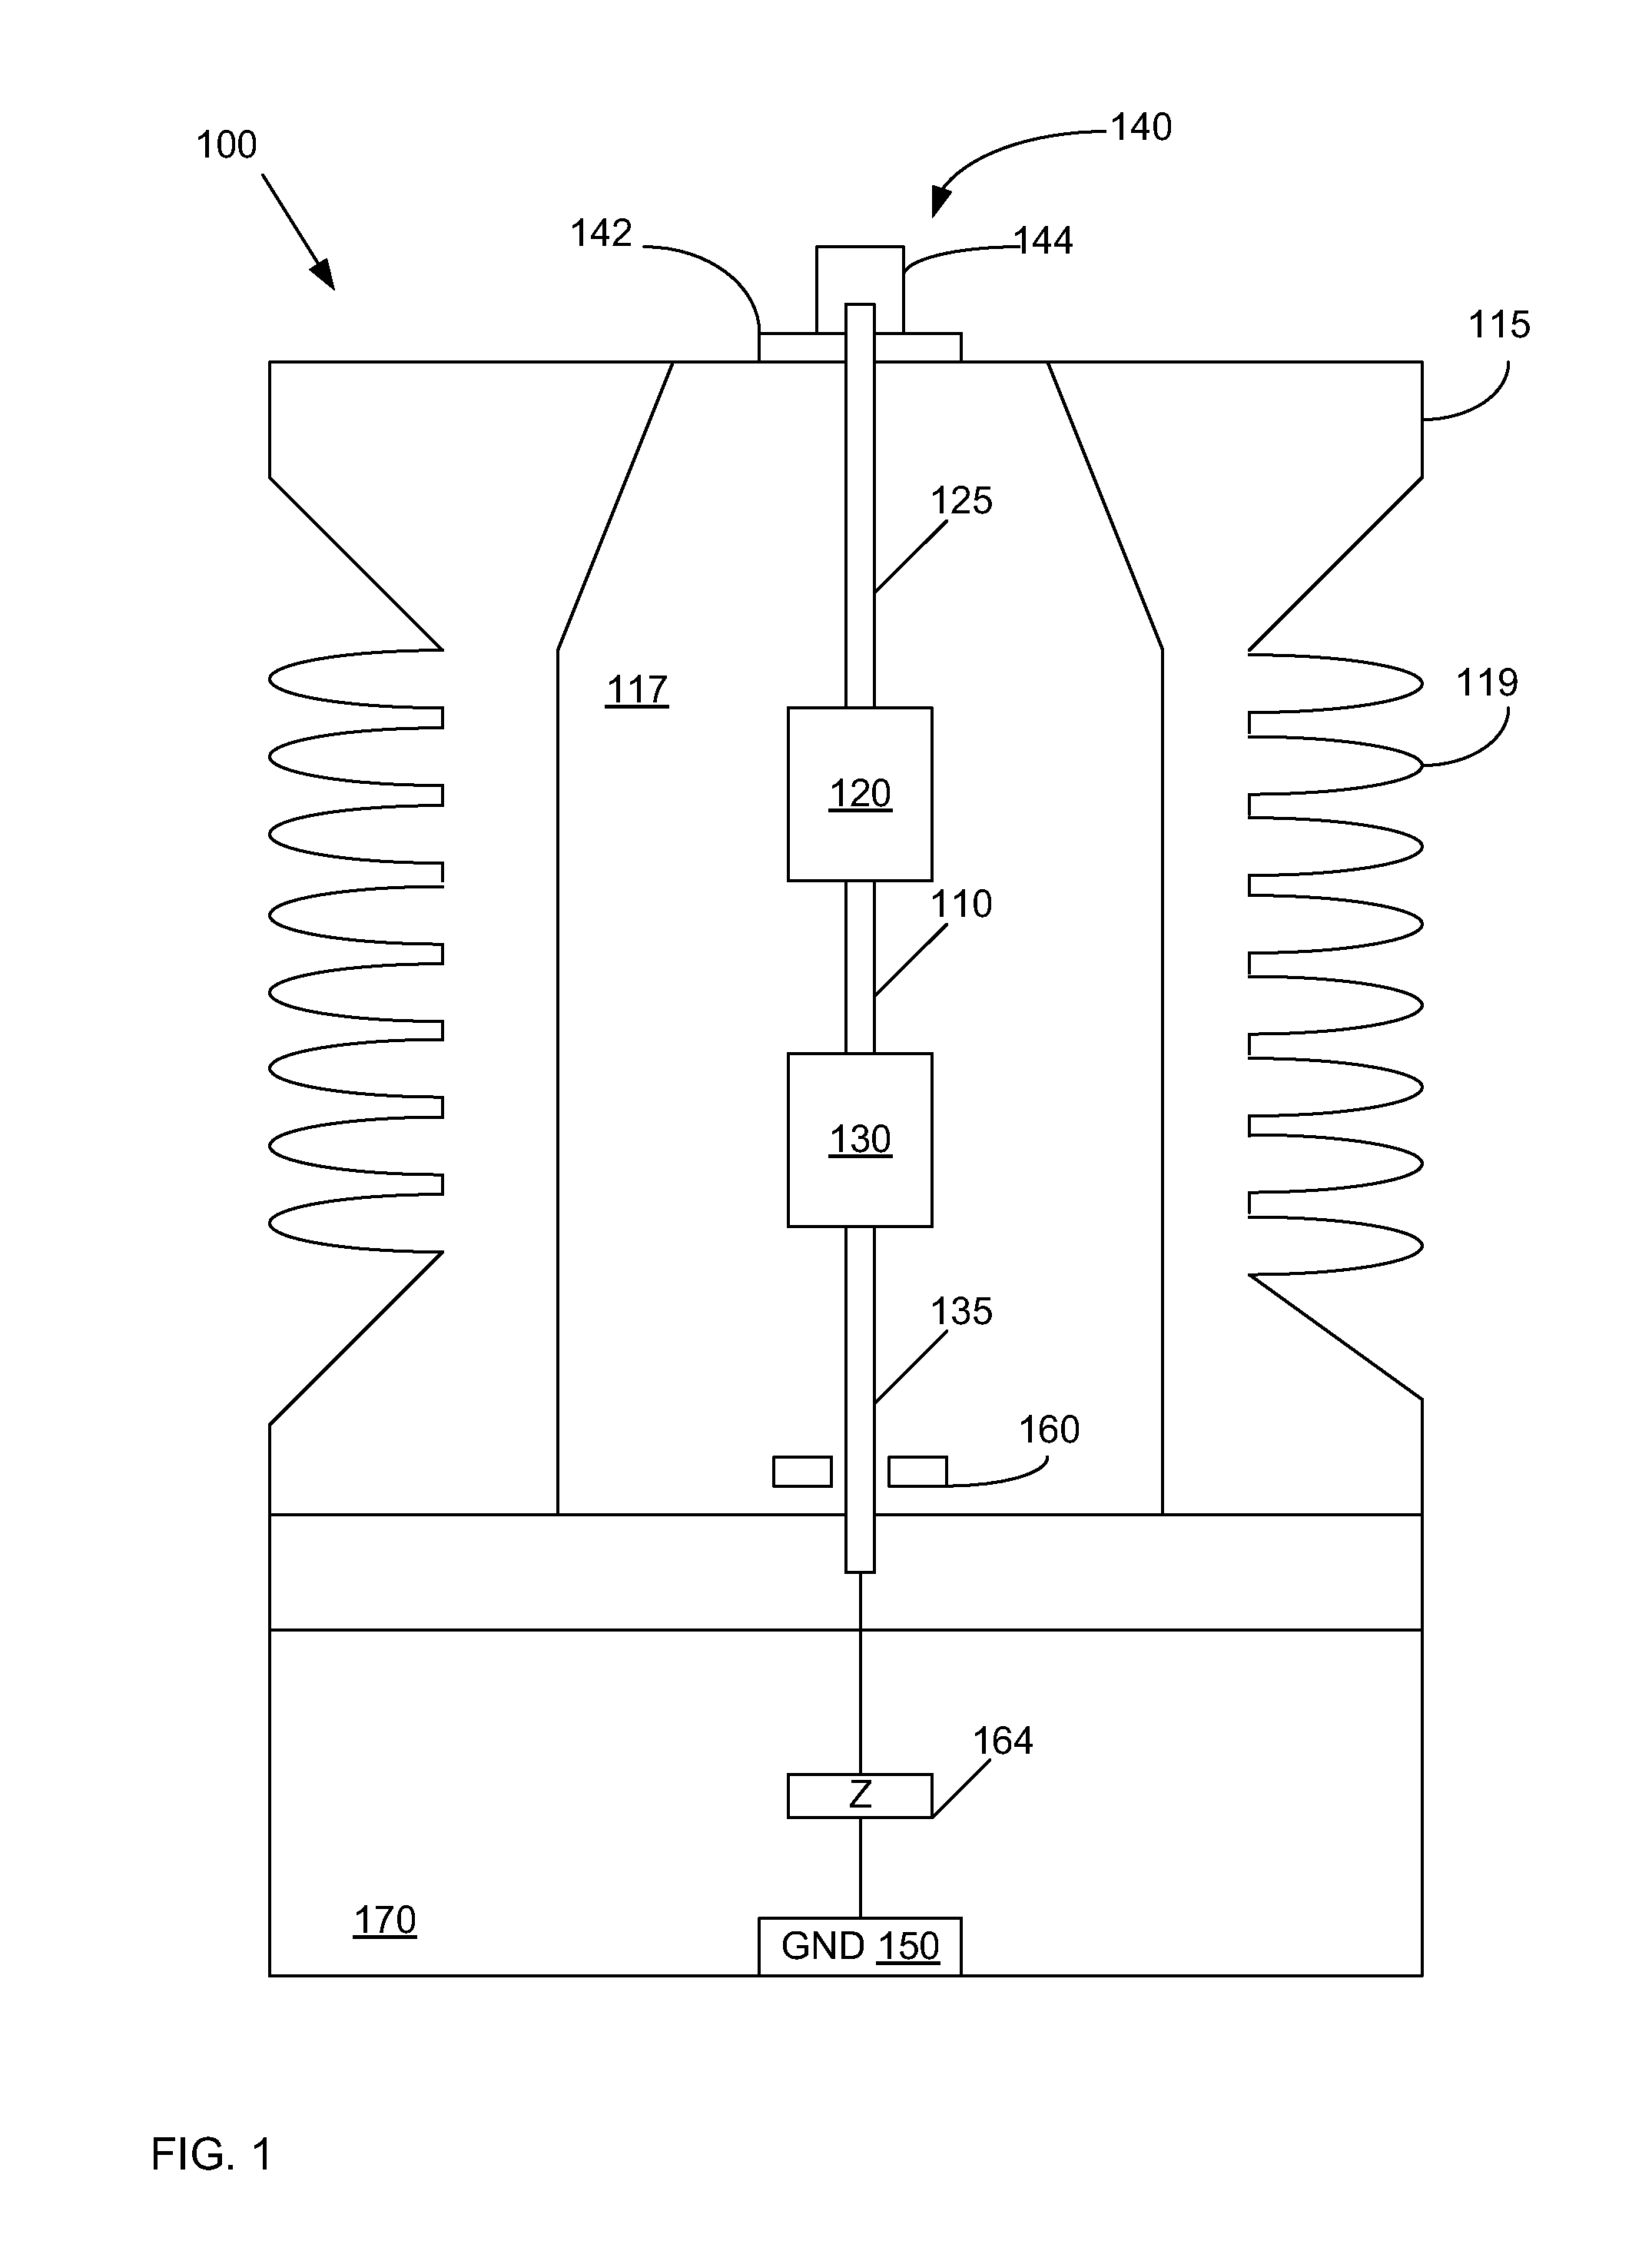 Partial discharge analysis coupling device that generates a pulse signal and a reference signal